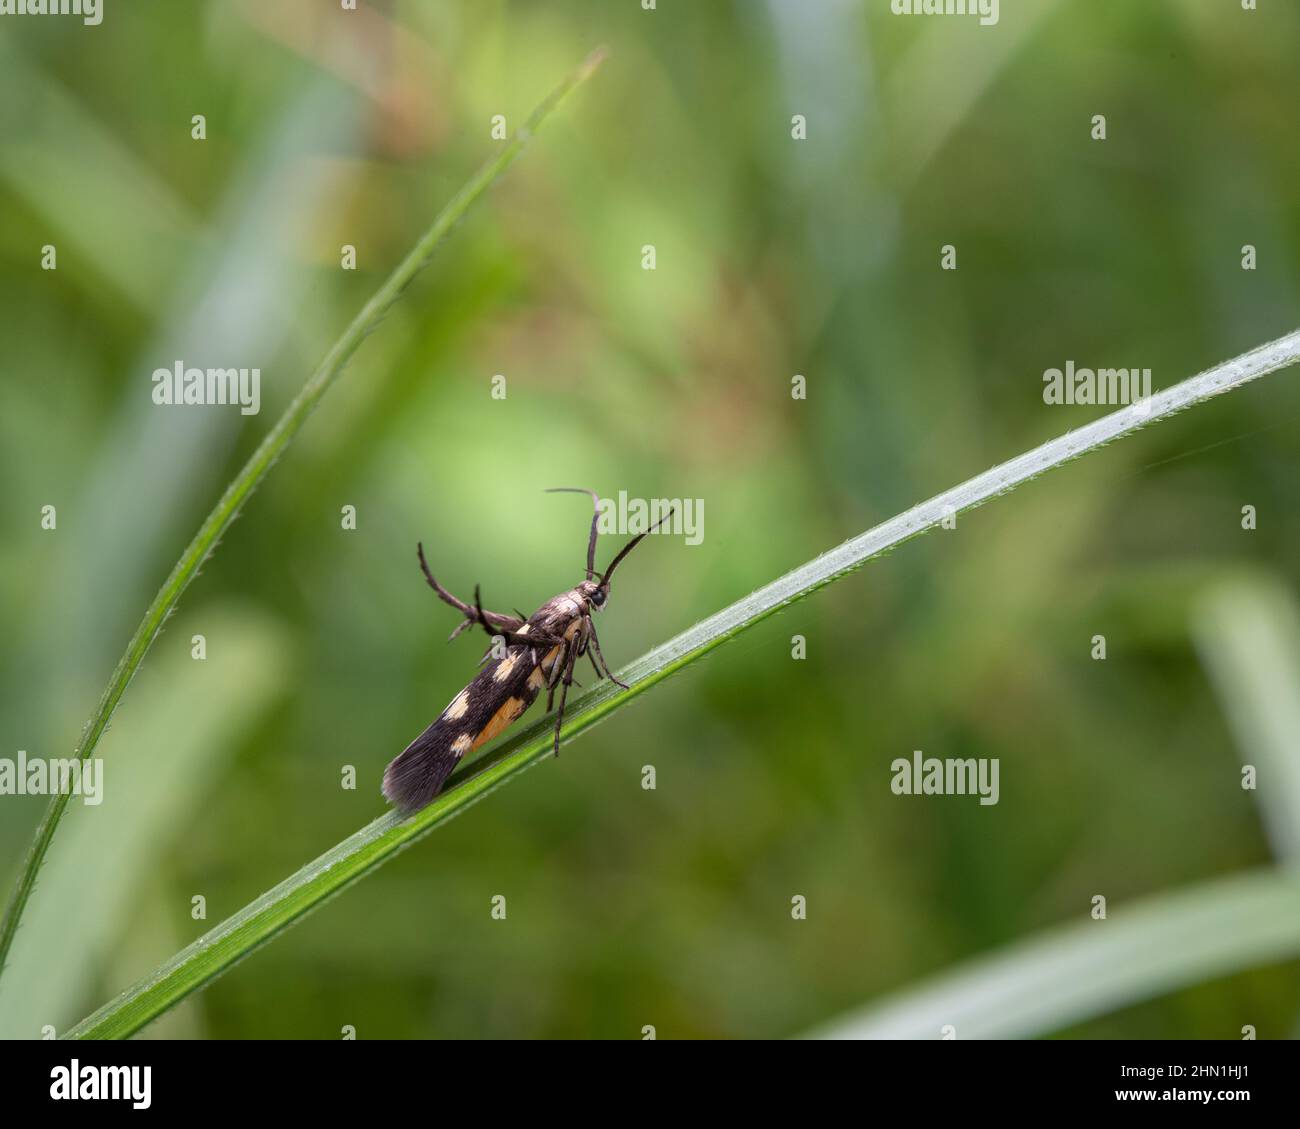 Closeup of a stathmopoda on the grass in a field with a blurry background Stock Photo